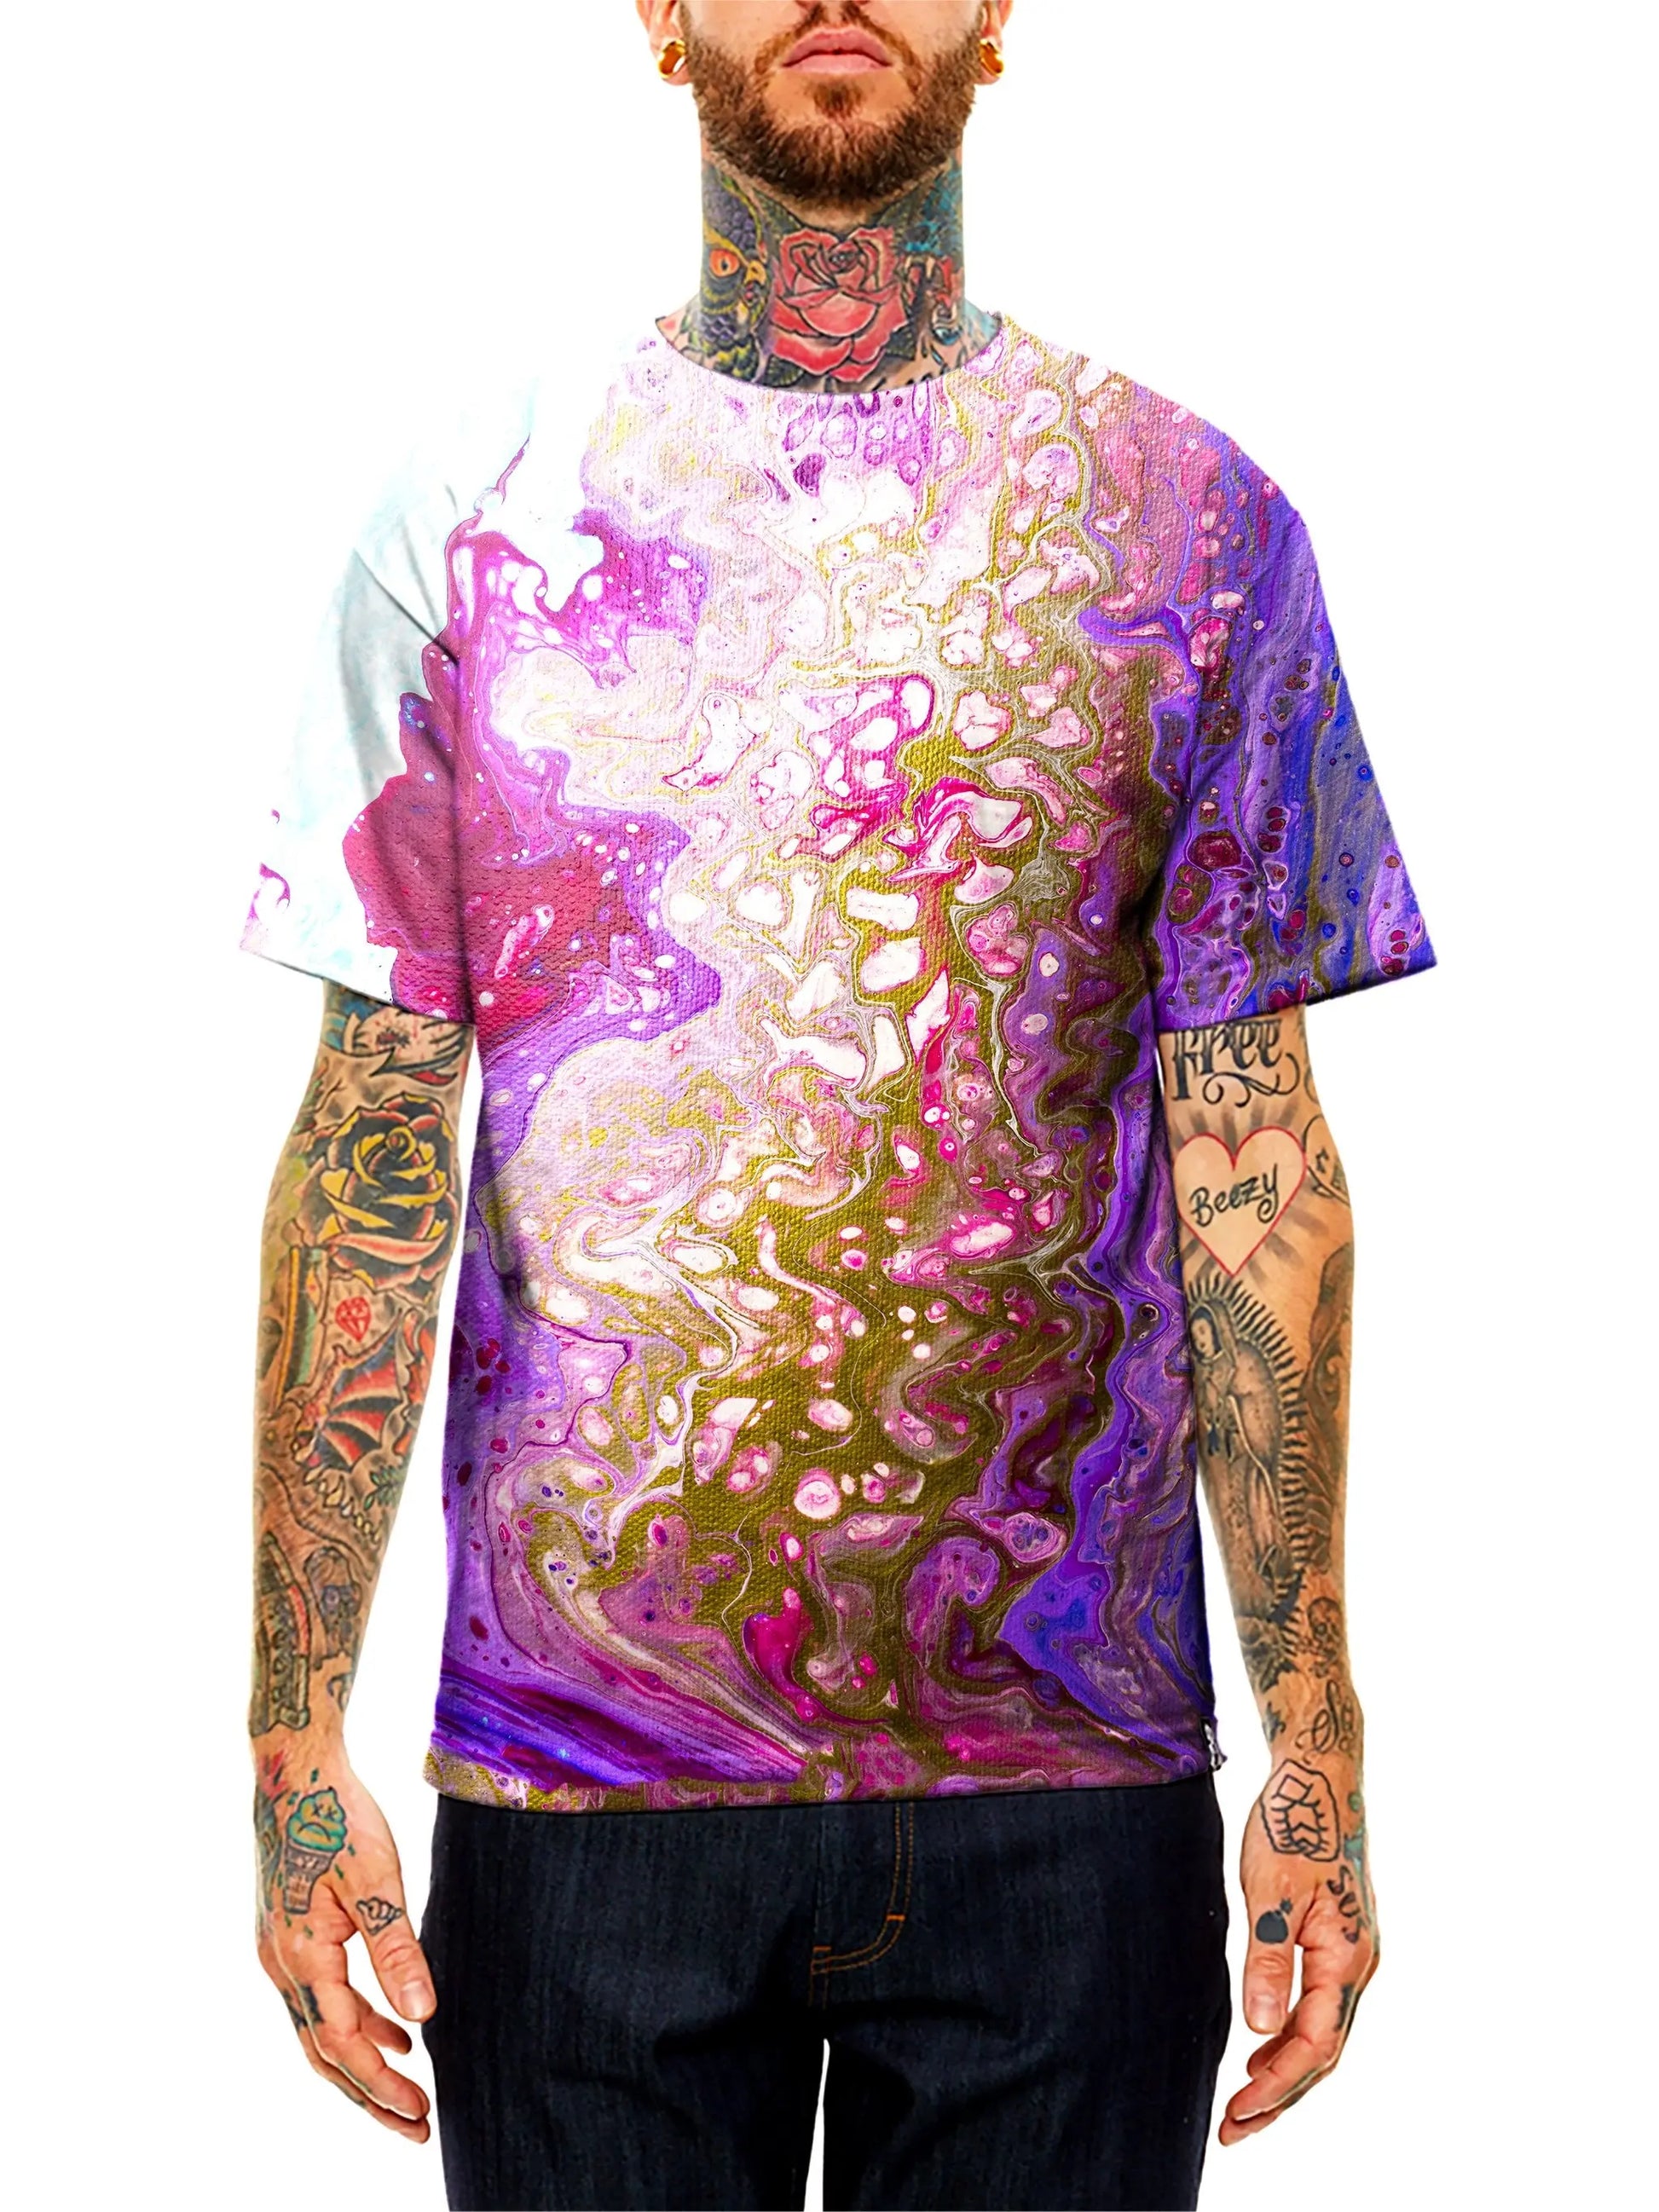 Model wearing GratefullyDyed Apparel purple, pink & gold marbled paint unisex t-shirt.